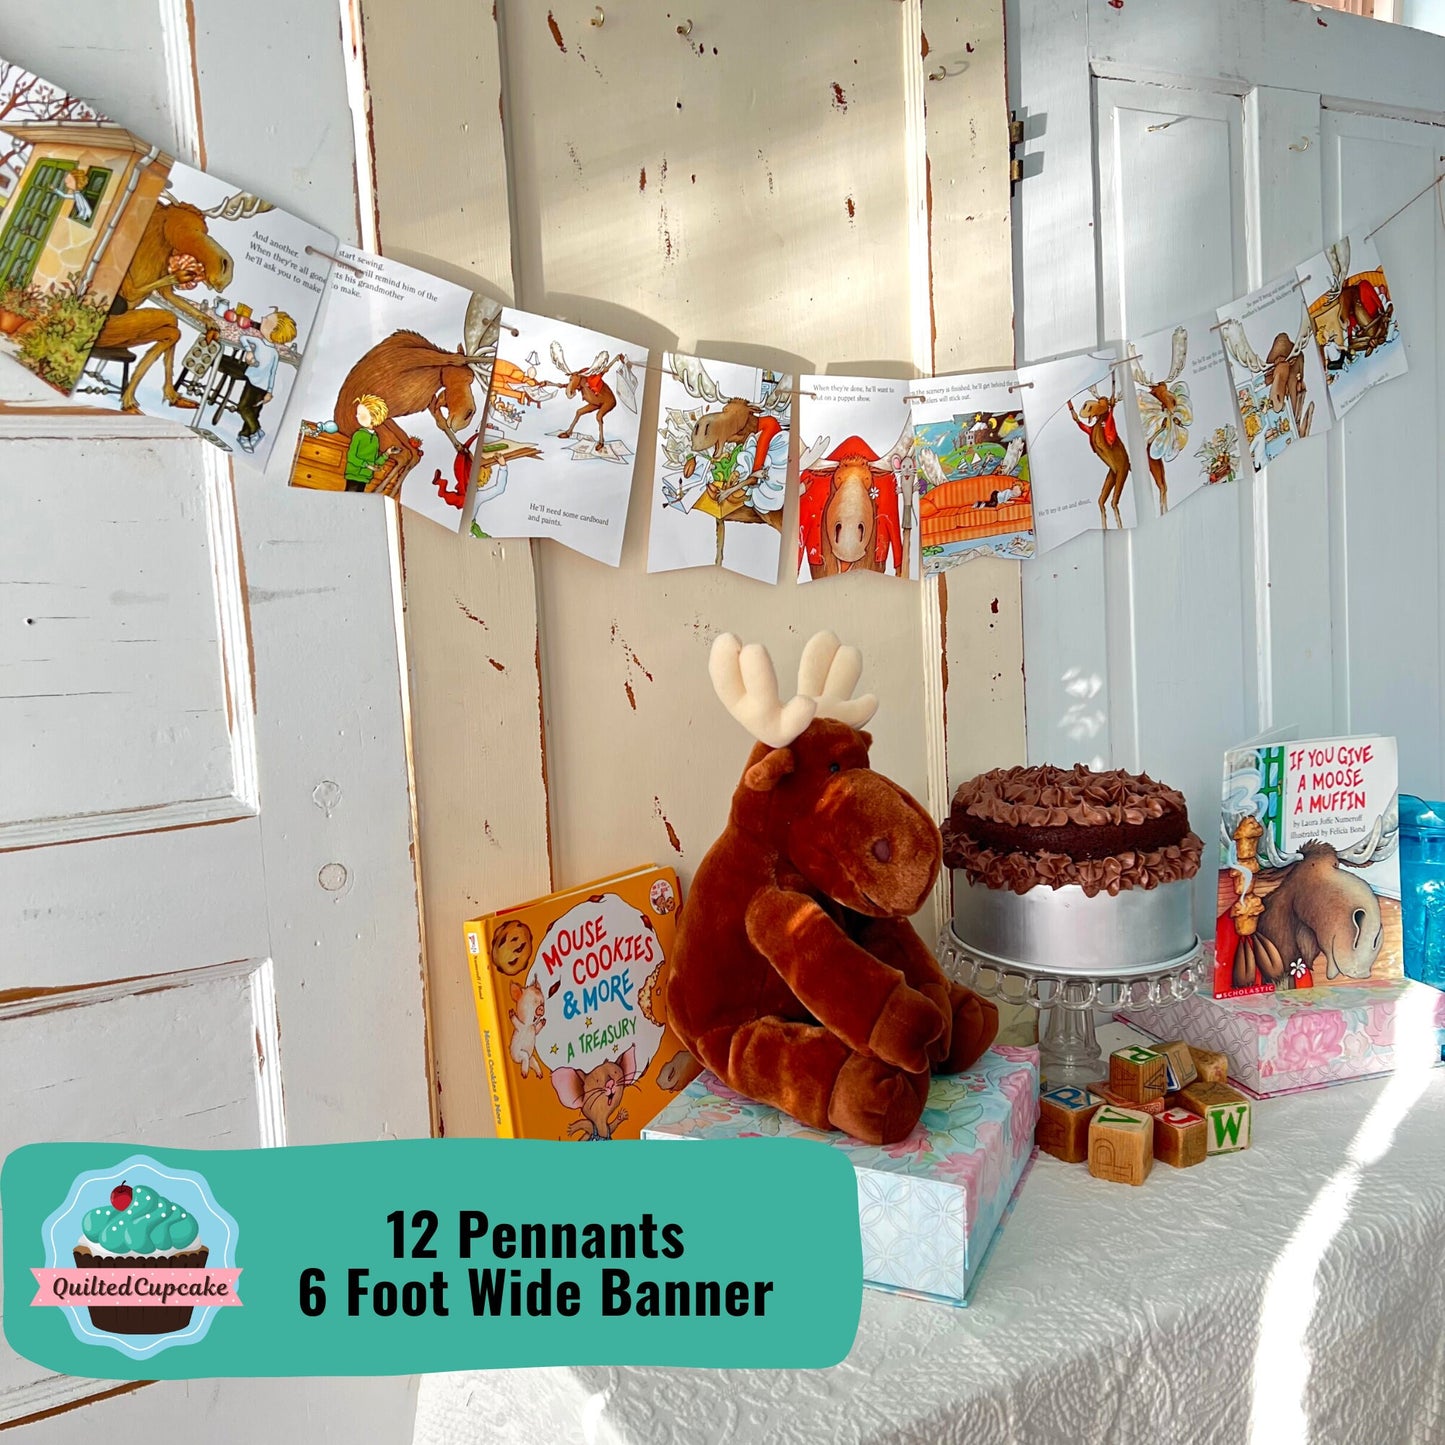 If You Give a Moose a Muffin Banner/Story Book Page Garland /12 Bunting Pennants for Moose Muffin Birthday Party/READY to SHIP